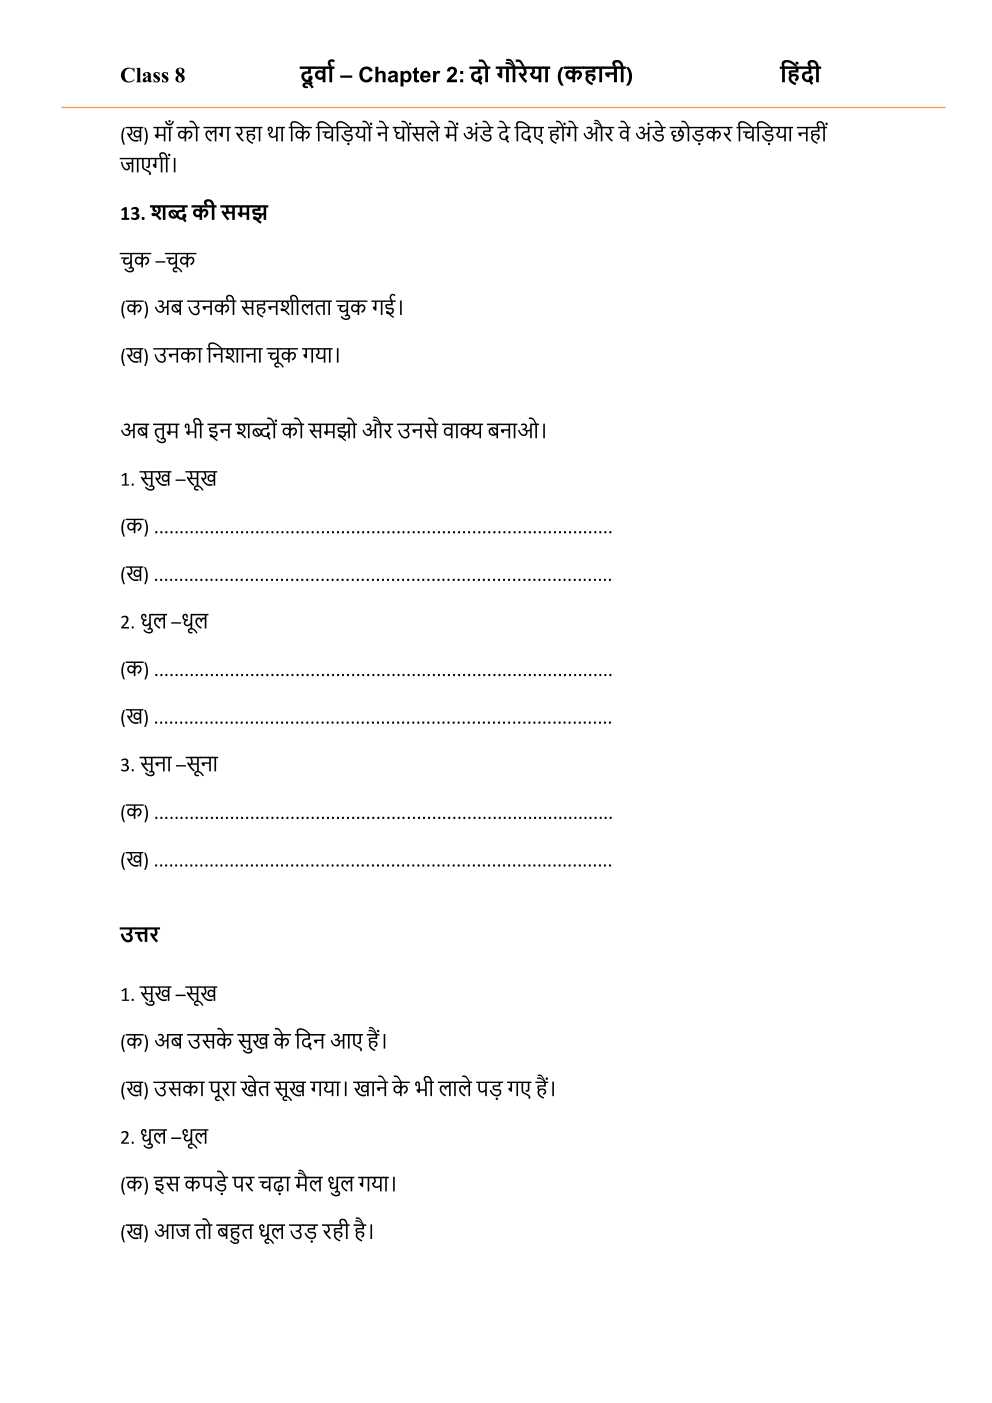 NCERT Solutions For Class 8 Hindi Durva Chapter 2